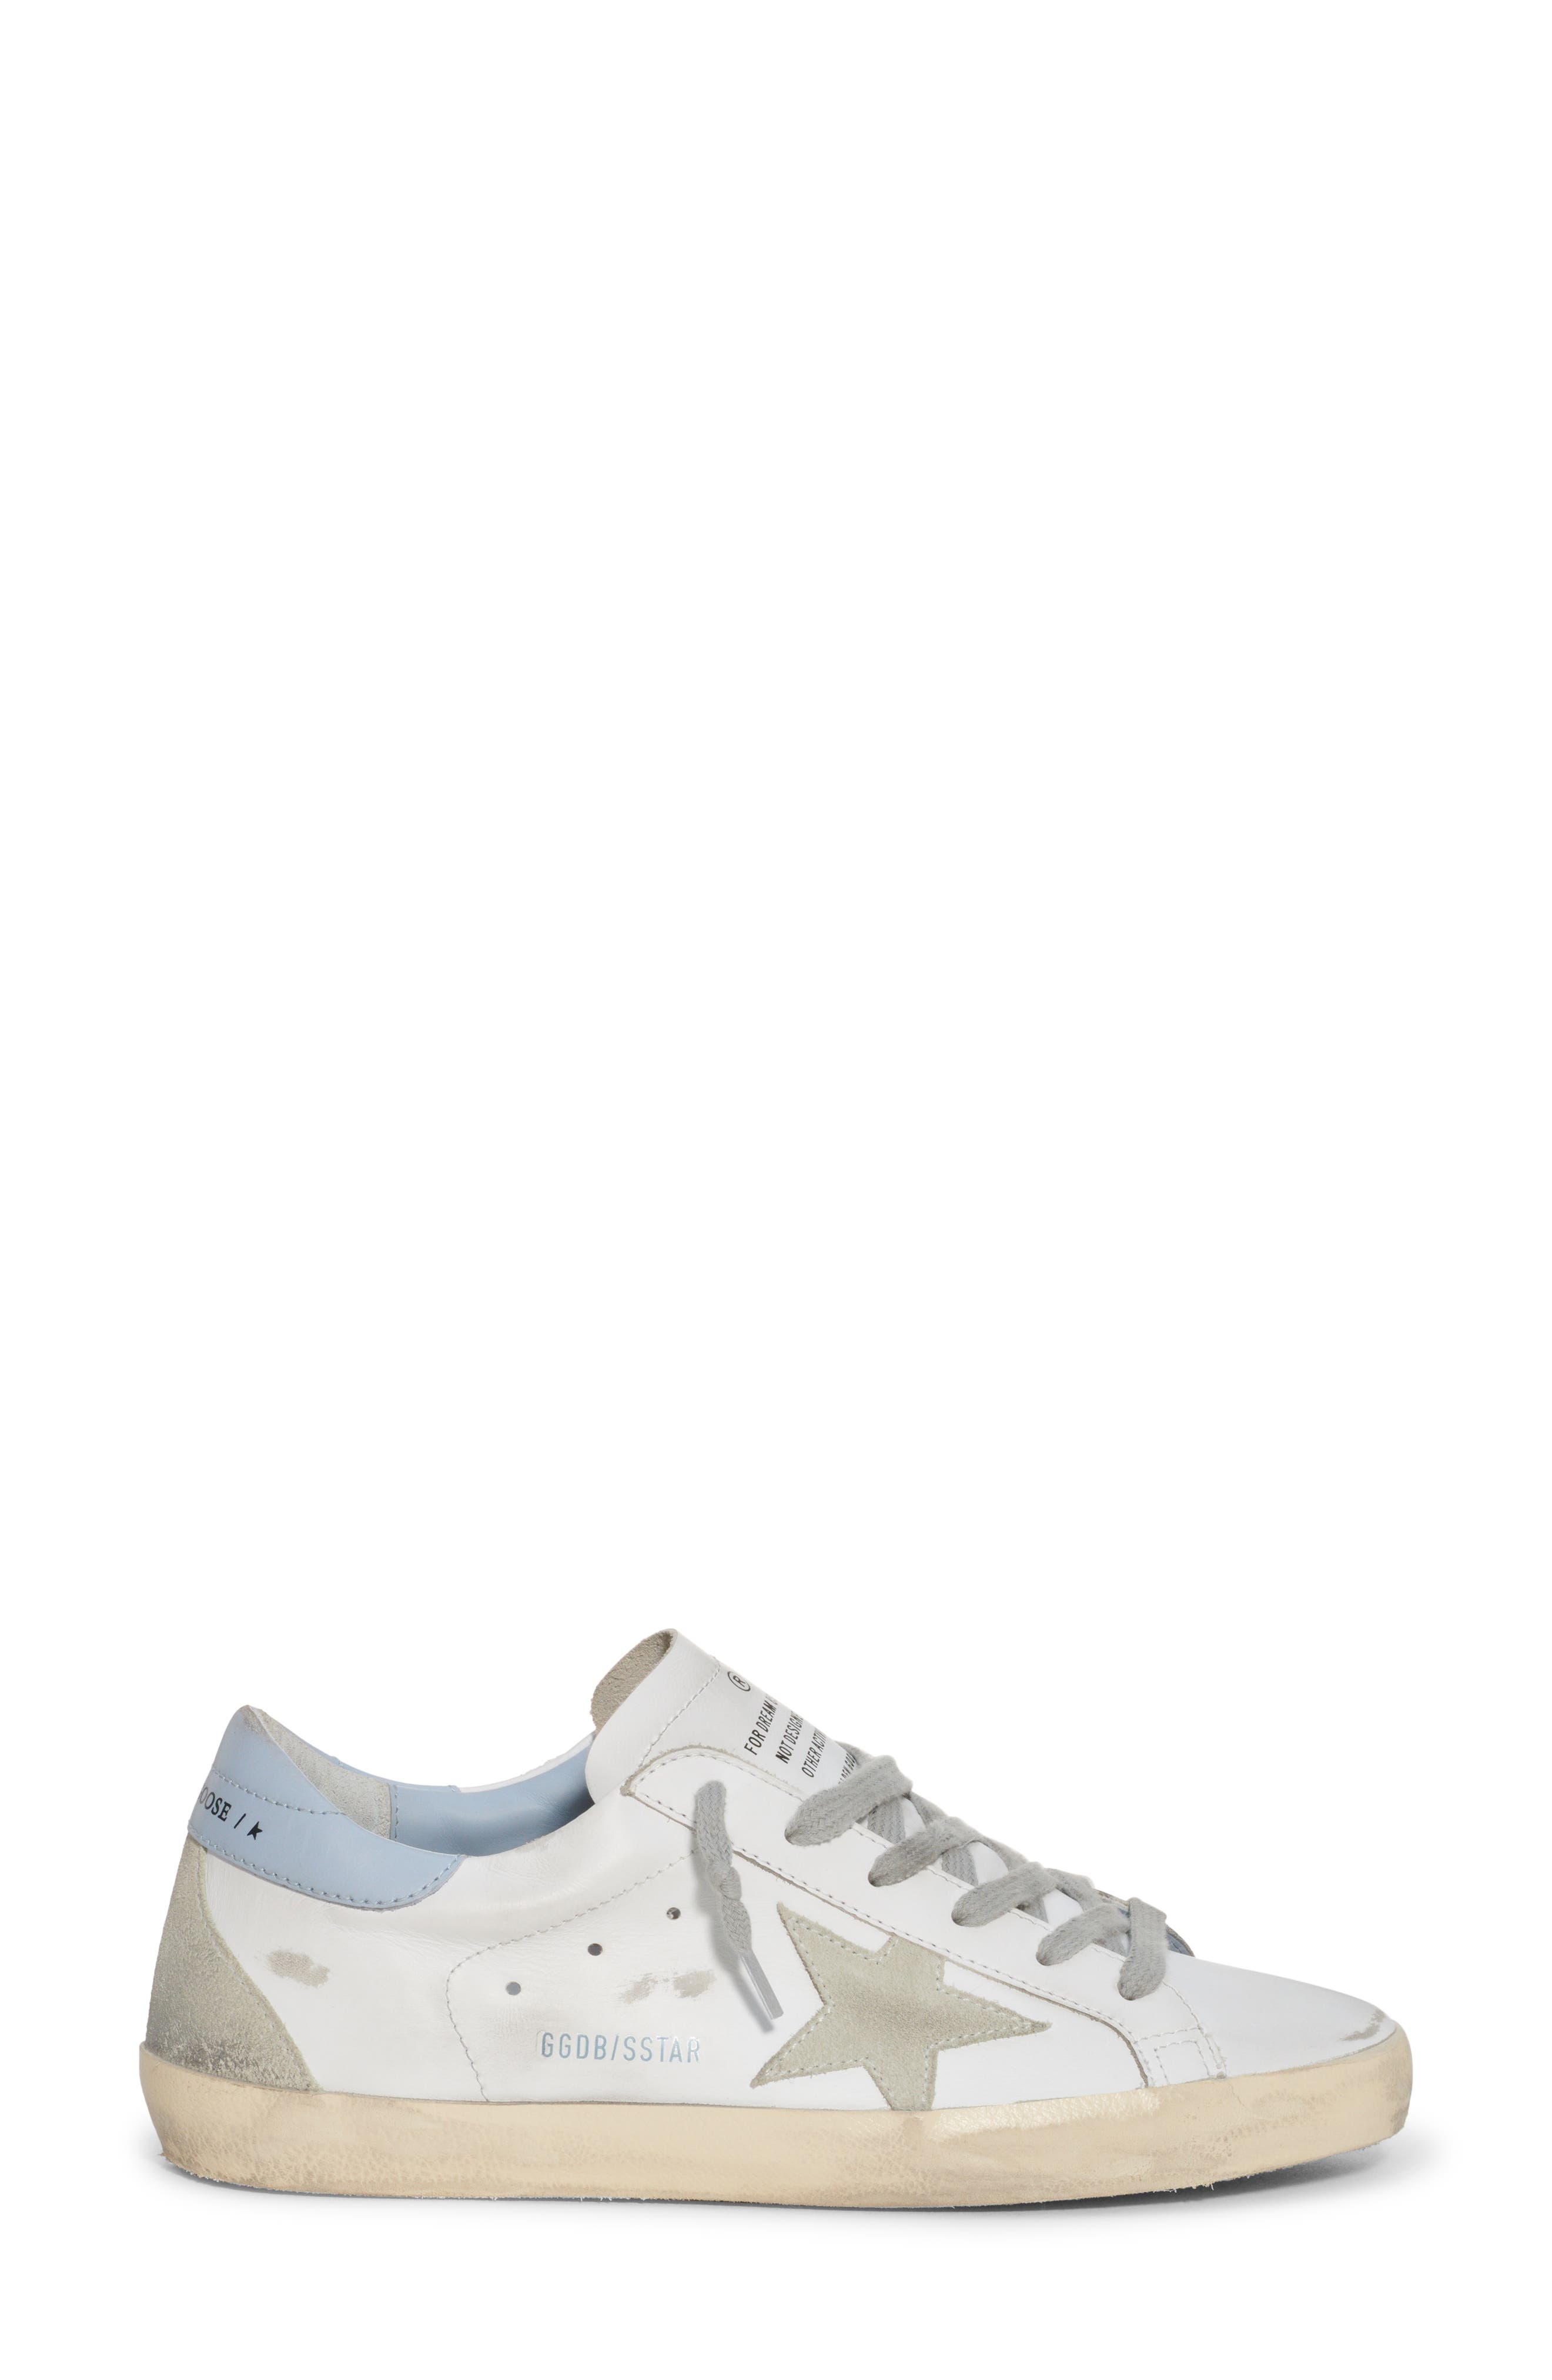 white and blue golden goose